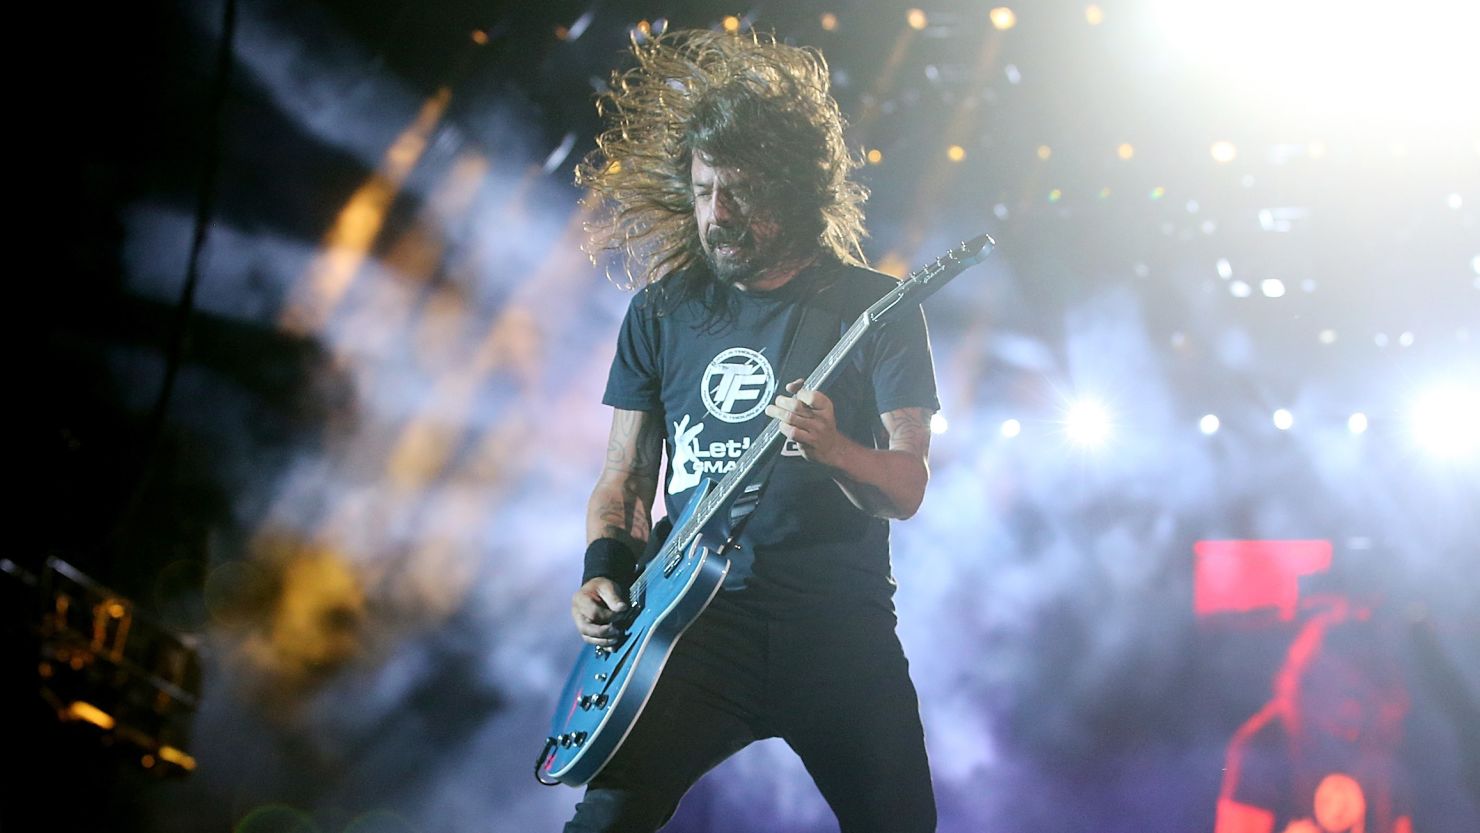 The Foo Fighters have history with Rick Astley's song "Never Gonna Give You Up."